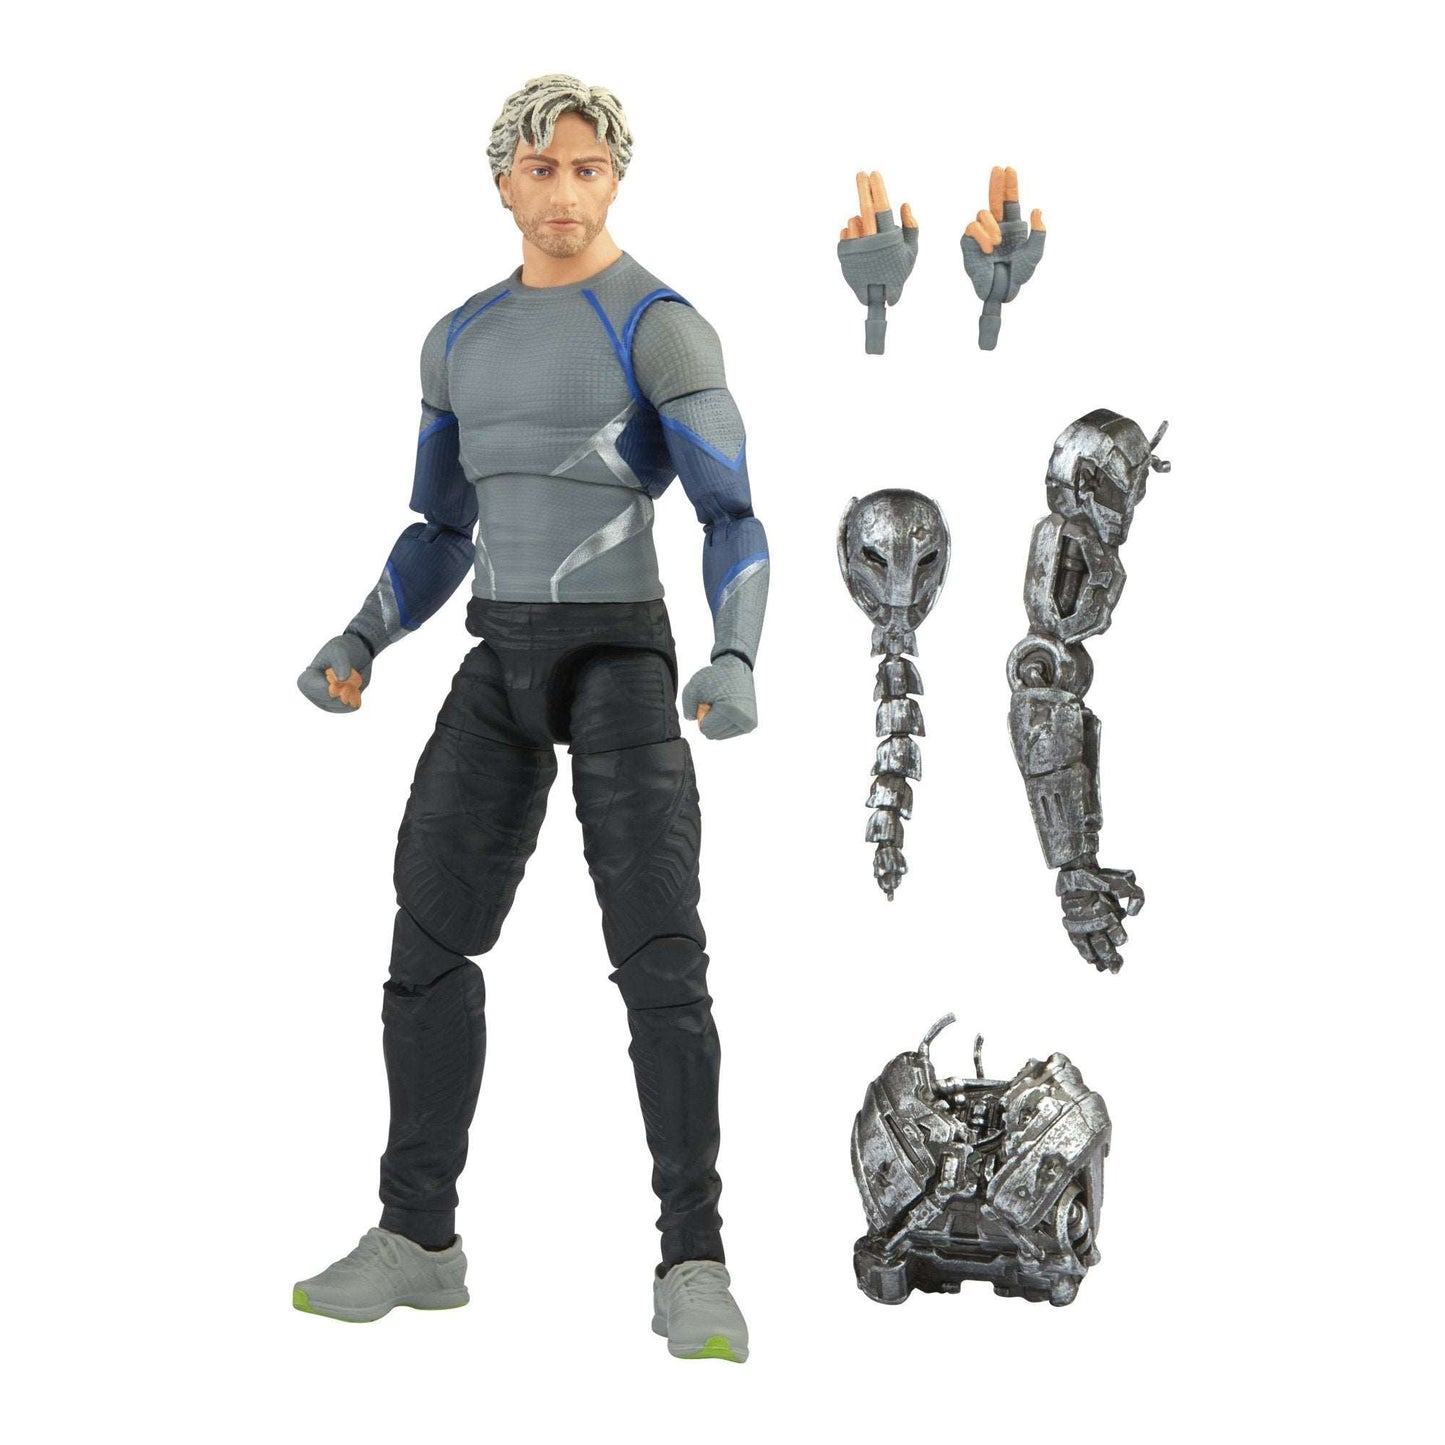 Hasbro Marvel Legends Series Avengers Age of Ultron Quicksilver figure and accessories